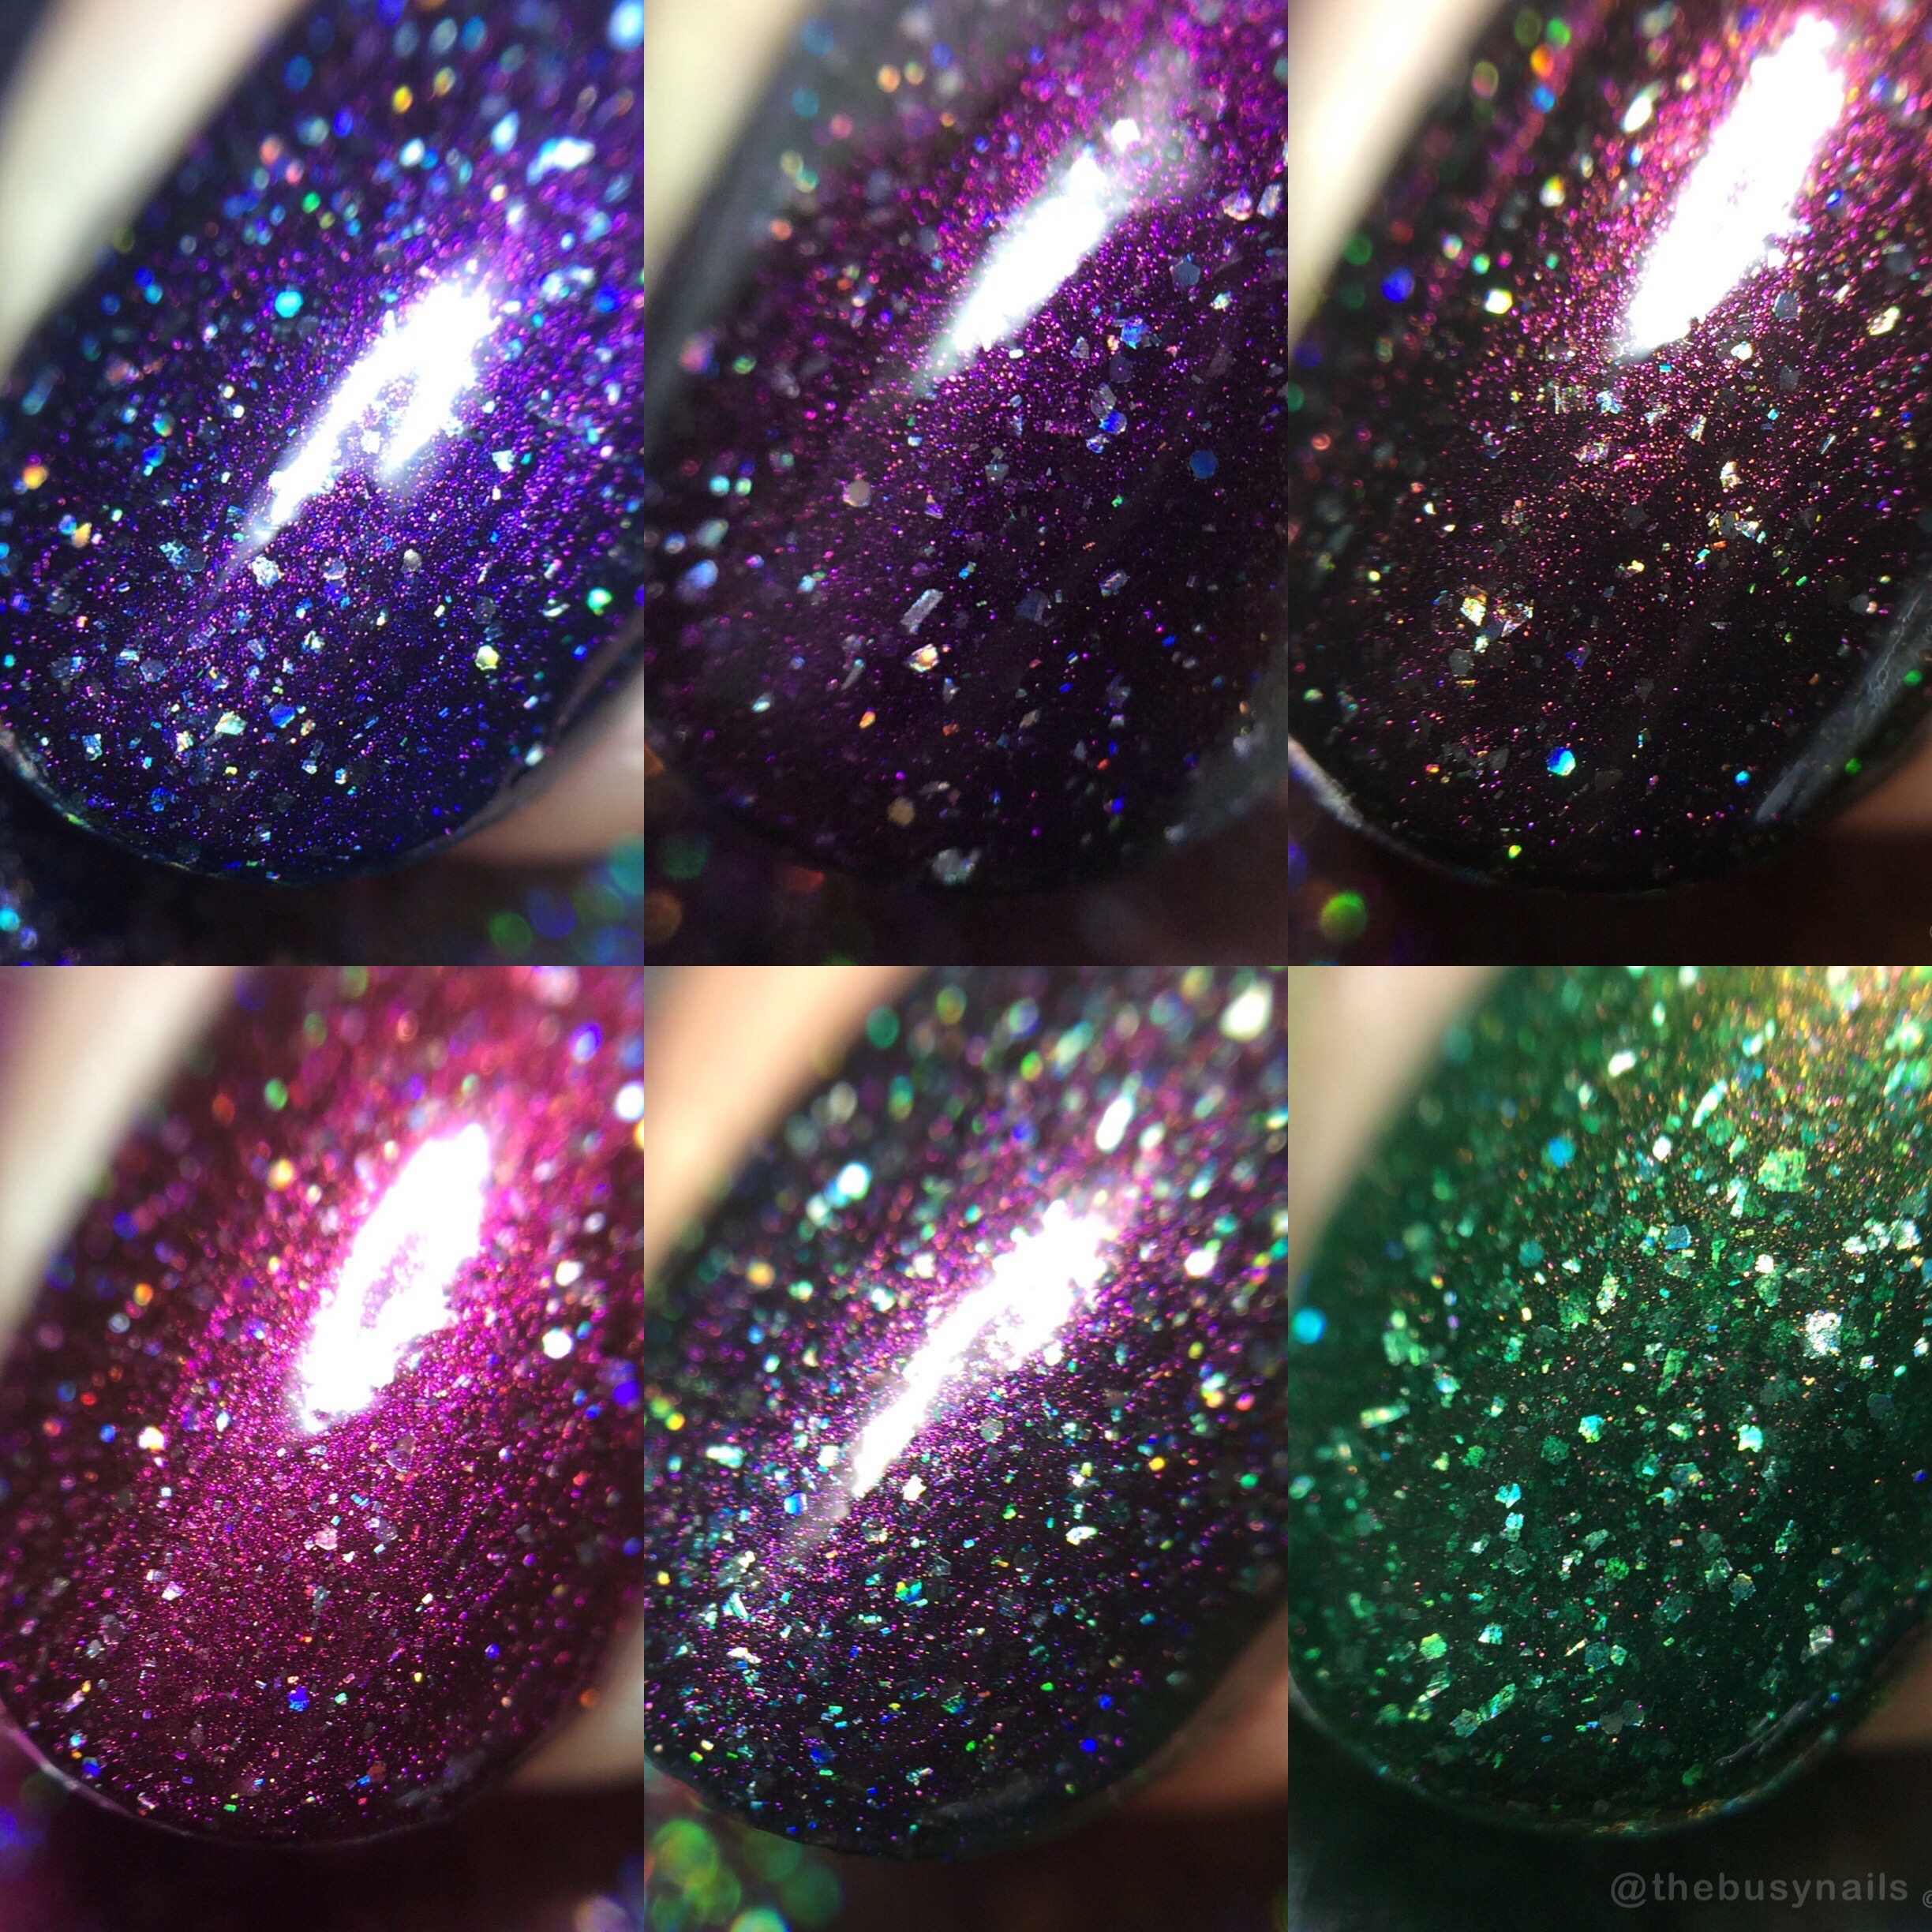 Beetlejuice - Glitter - Purple Fine Glitter Mix with Holographic Gold –  80's Girl Glitter